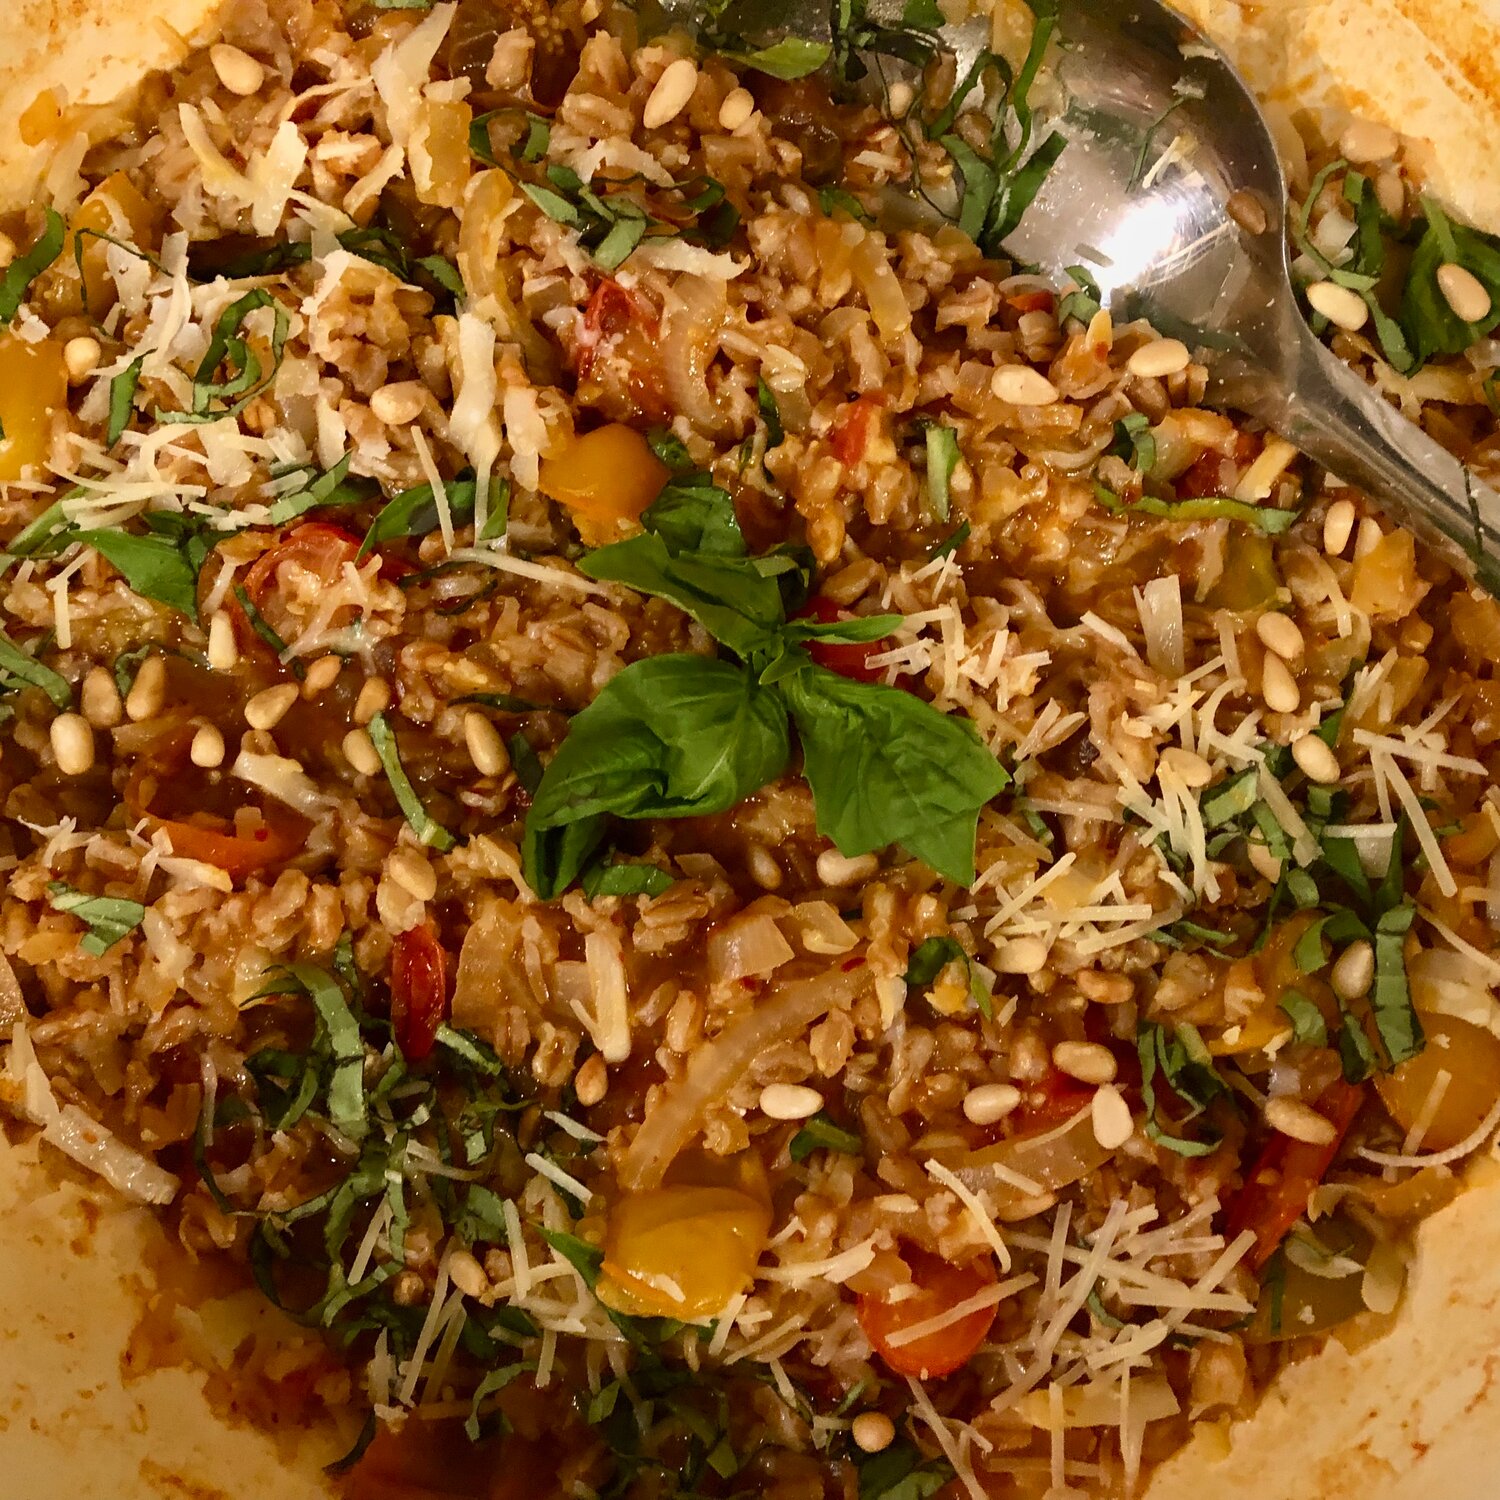 Deb Perelman’s One-pan Farro with Tomatoes is both colorful and tasty.